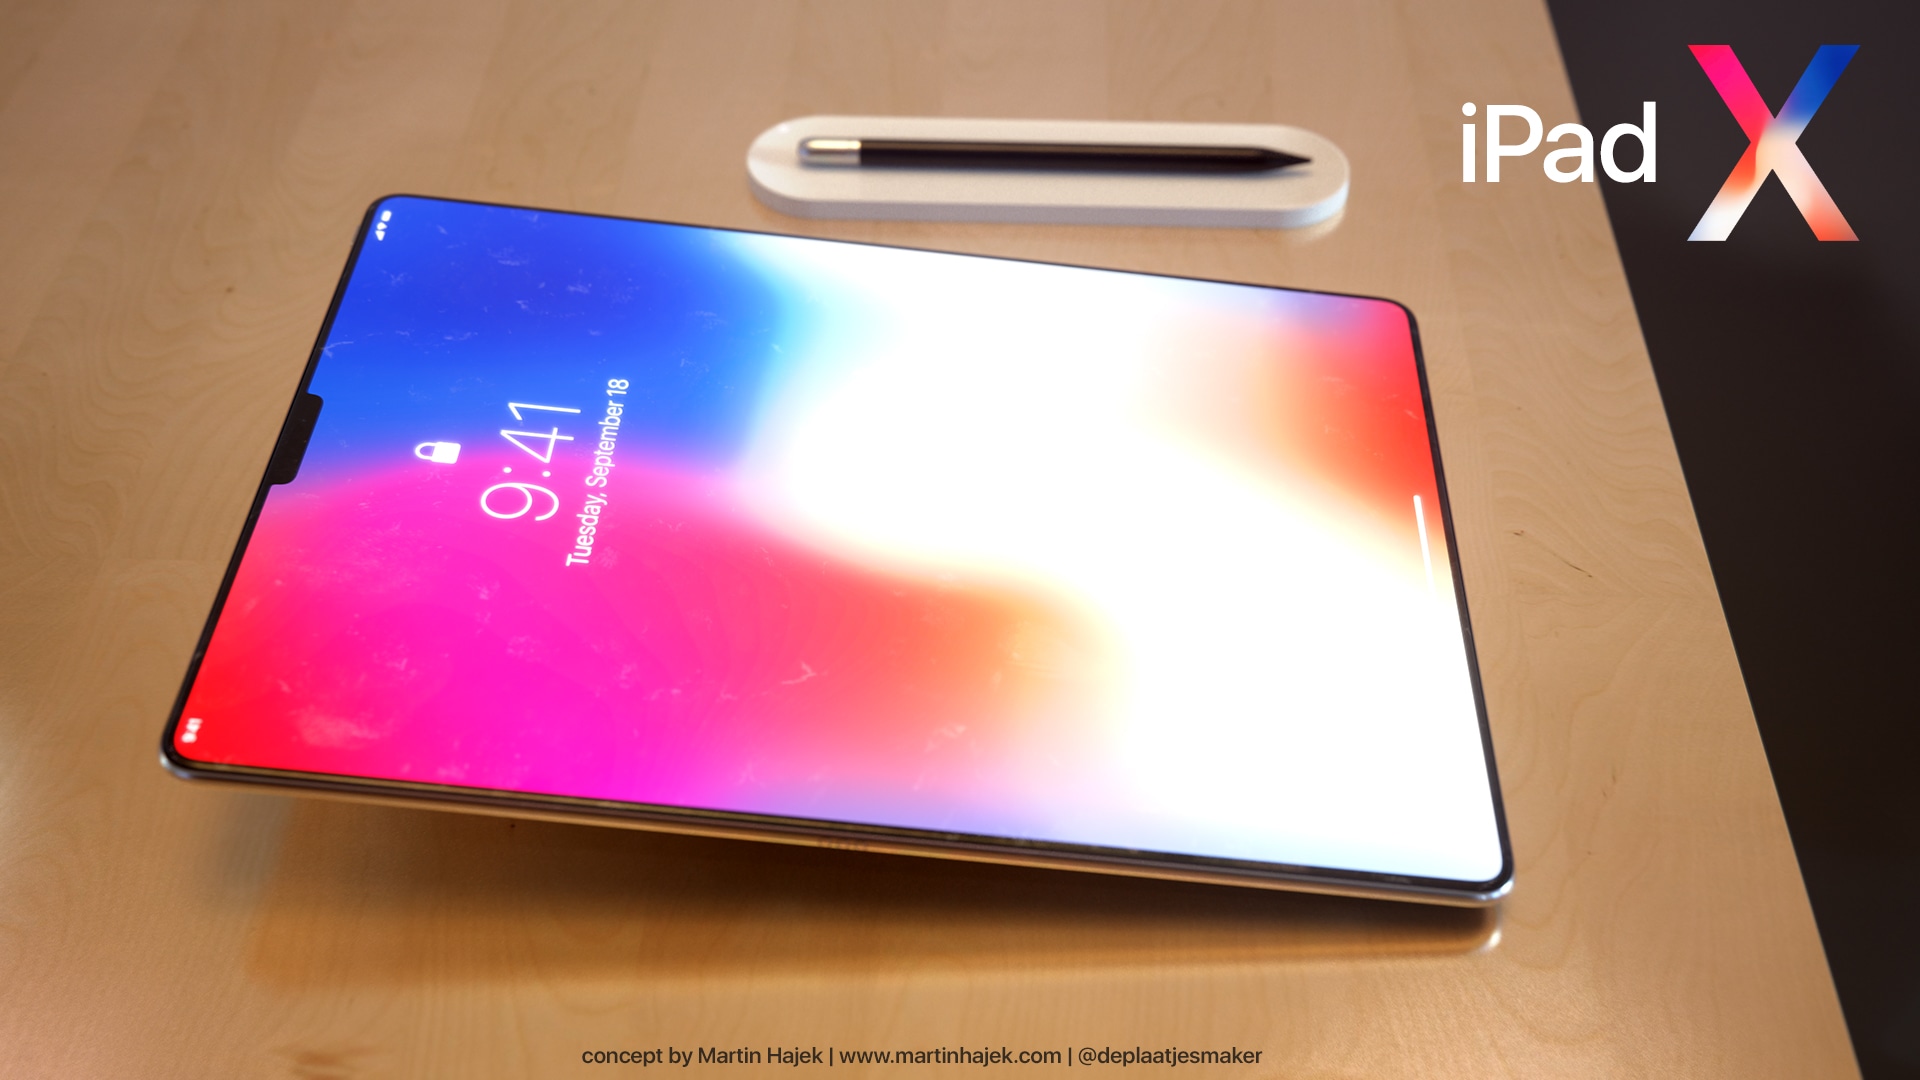 Designer specialized in realistic renders shows what a future “iPad X” might look like